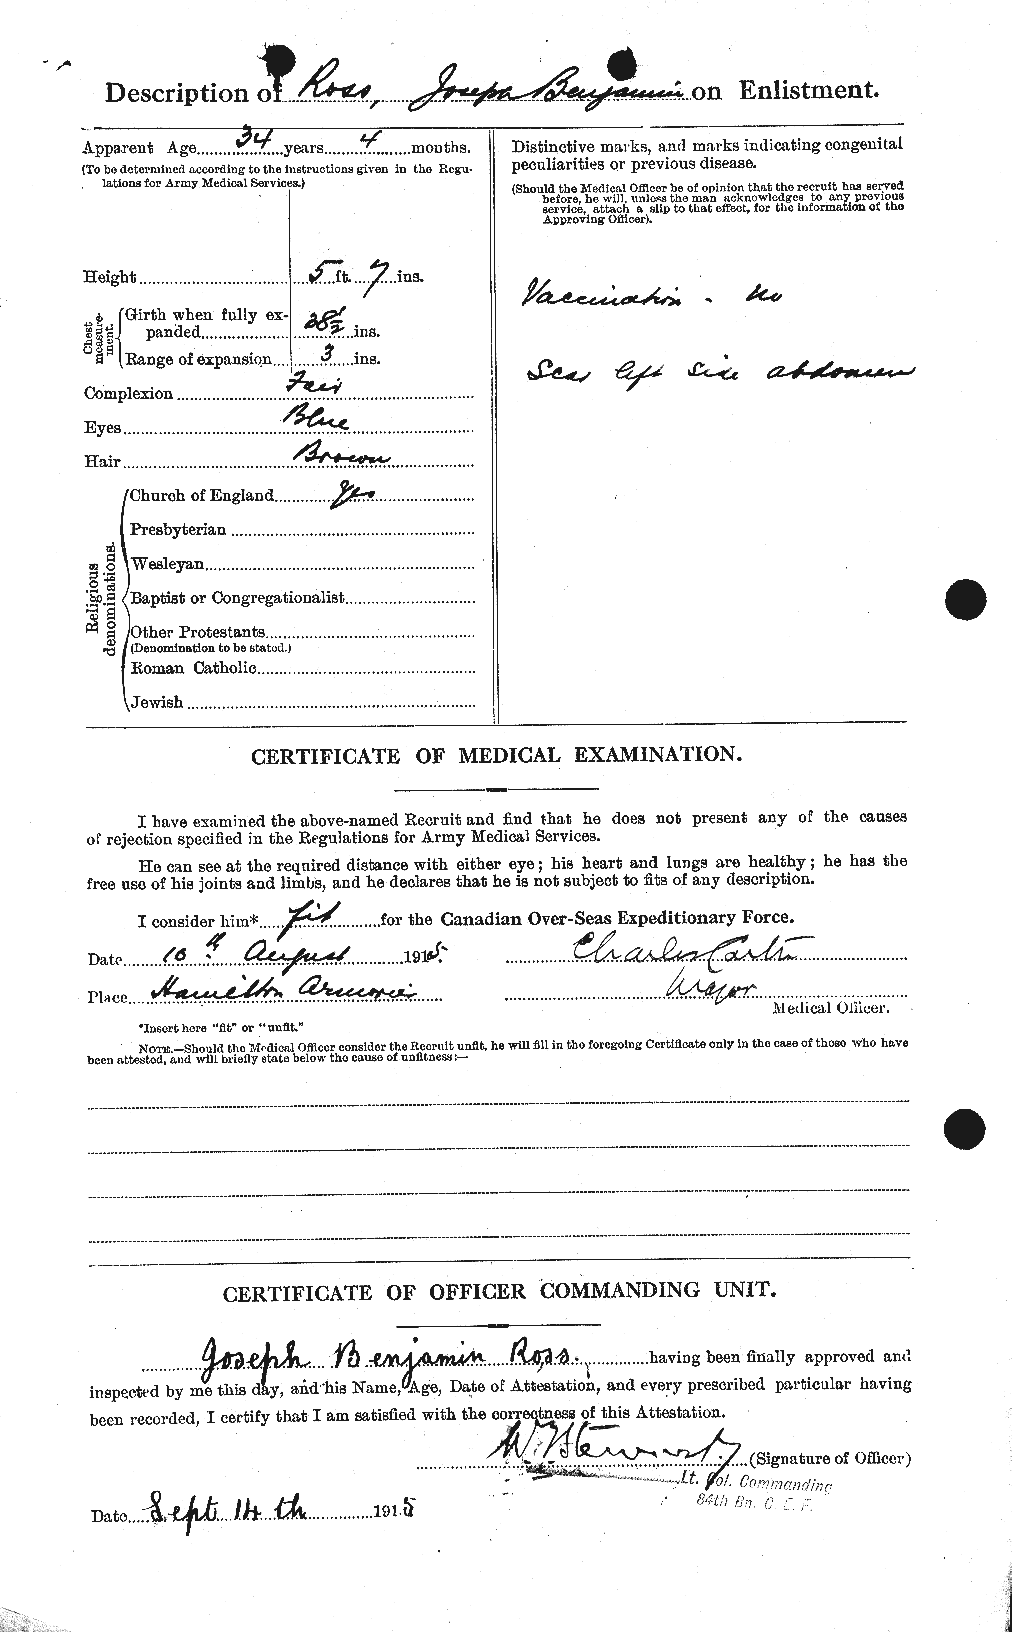 Personnel Records of the First World War - CEF 614961b